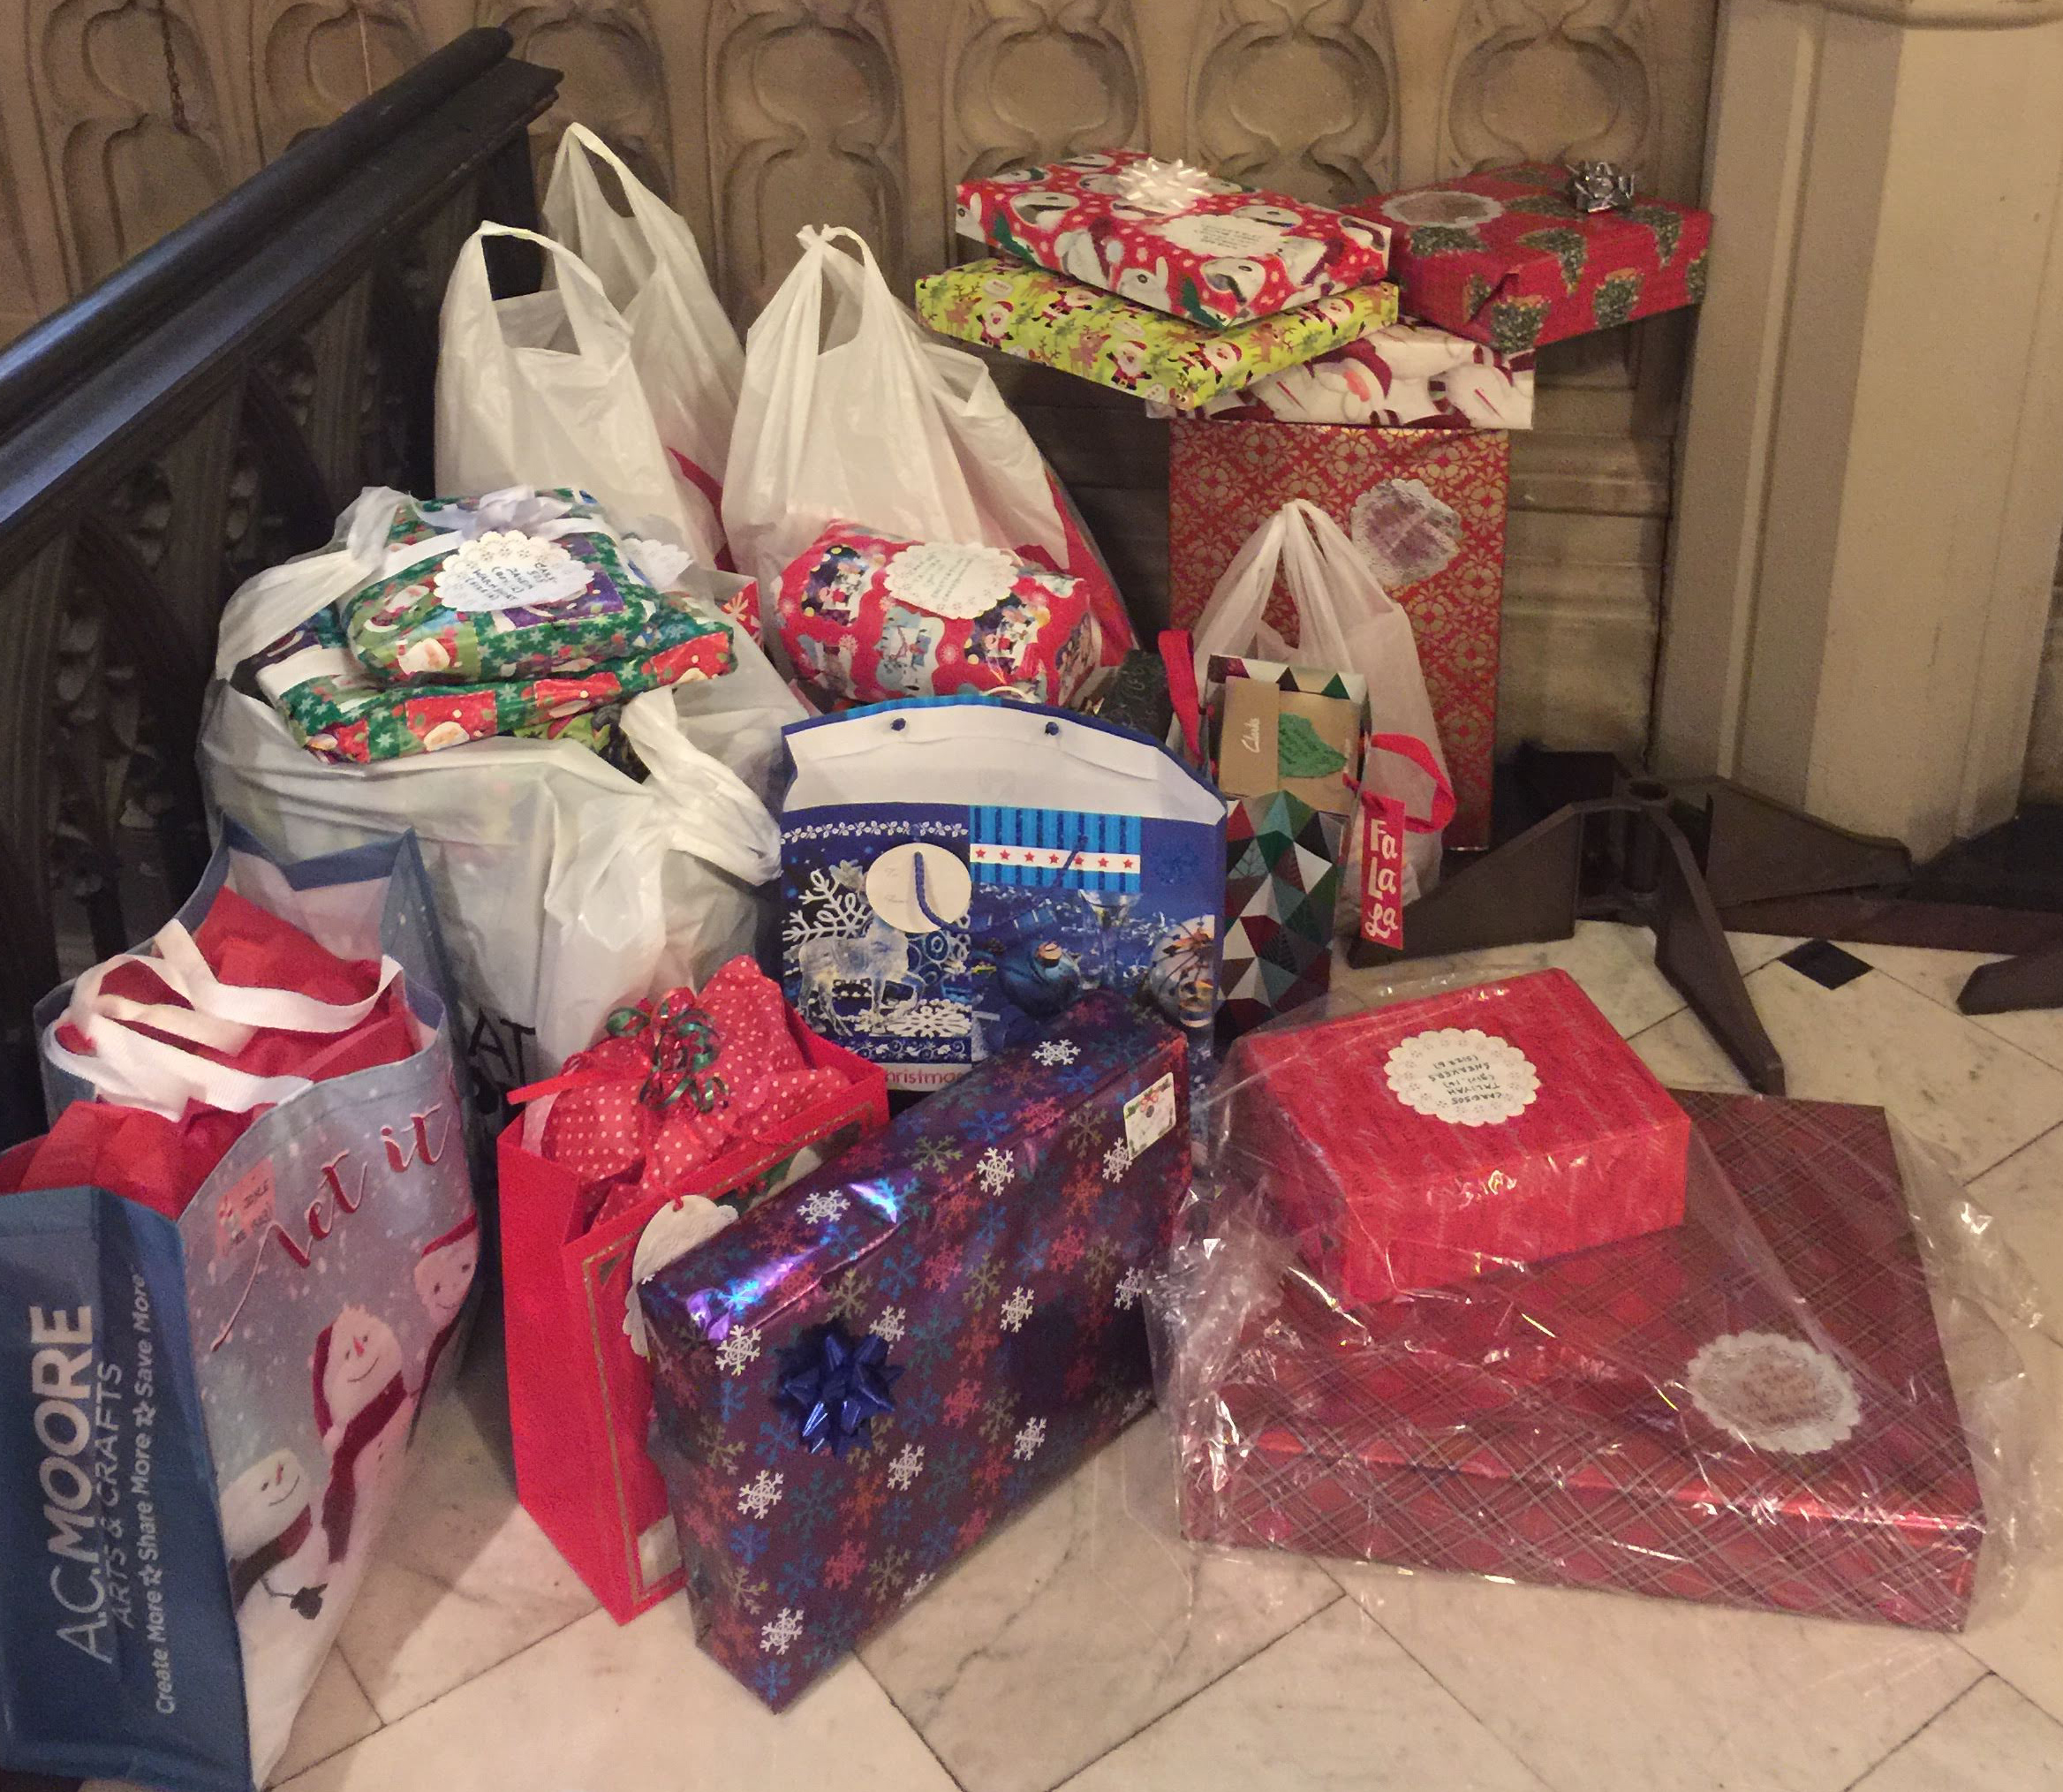 Large pile of presents